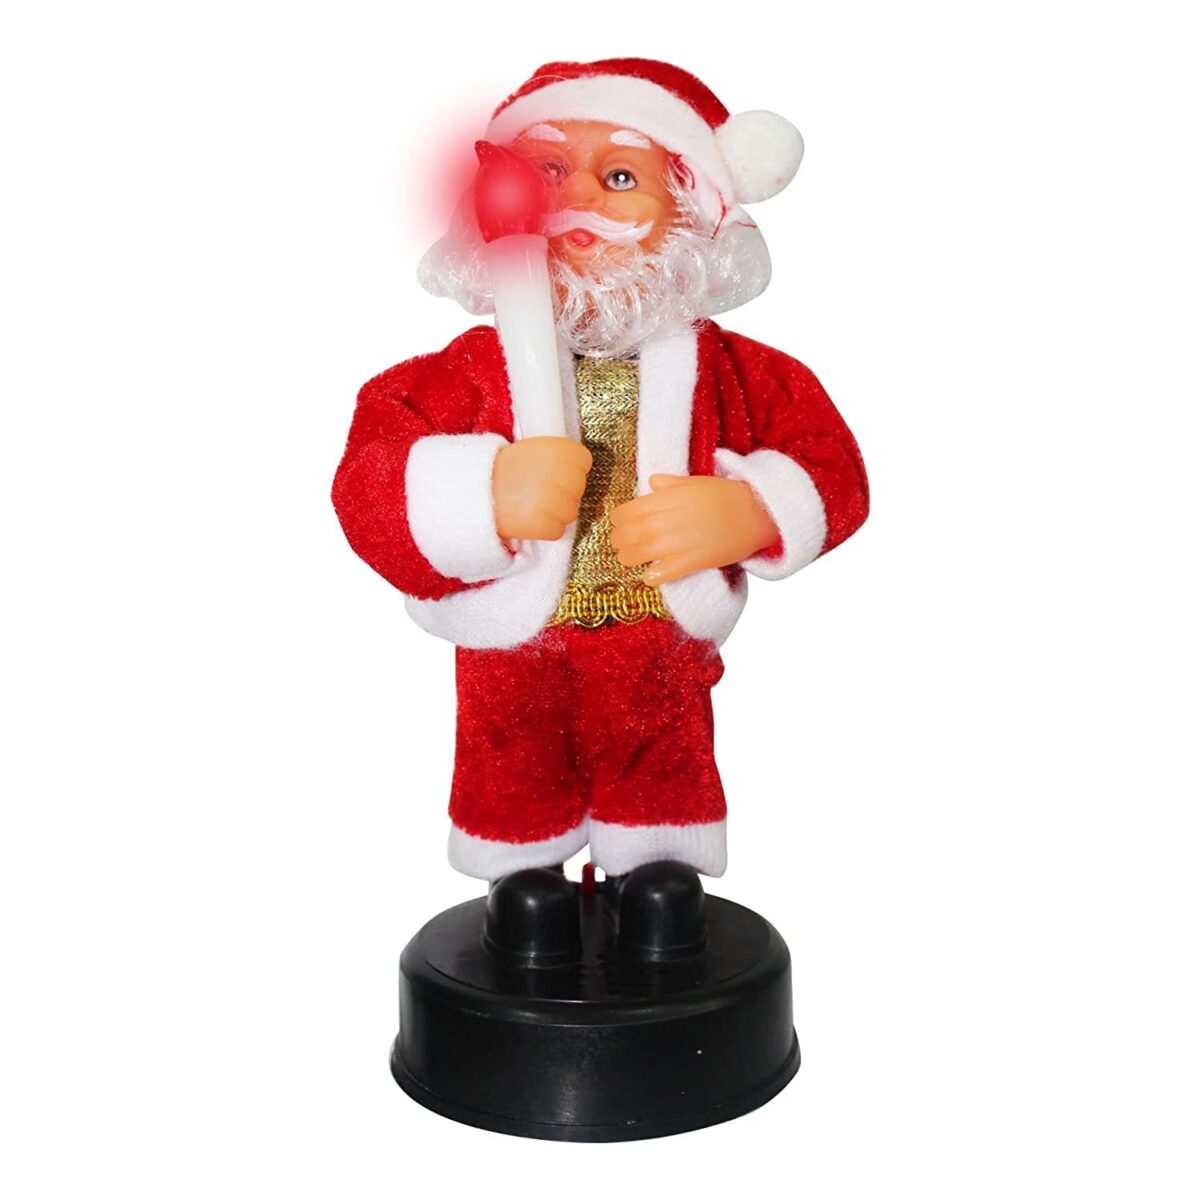 Moving Santa is a festive decoration featuring a Santa Claus figure that animates and often includes music. Designed for the Christmas season, it brings holiday cheer with lively movements like waving or dancing. This decoration is commonly used to enhance festive atmospheres in homes or public spaces, adding a joyful touch to holiday celebrations.